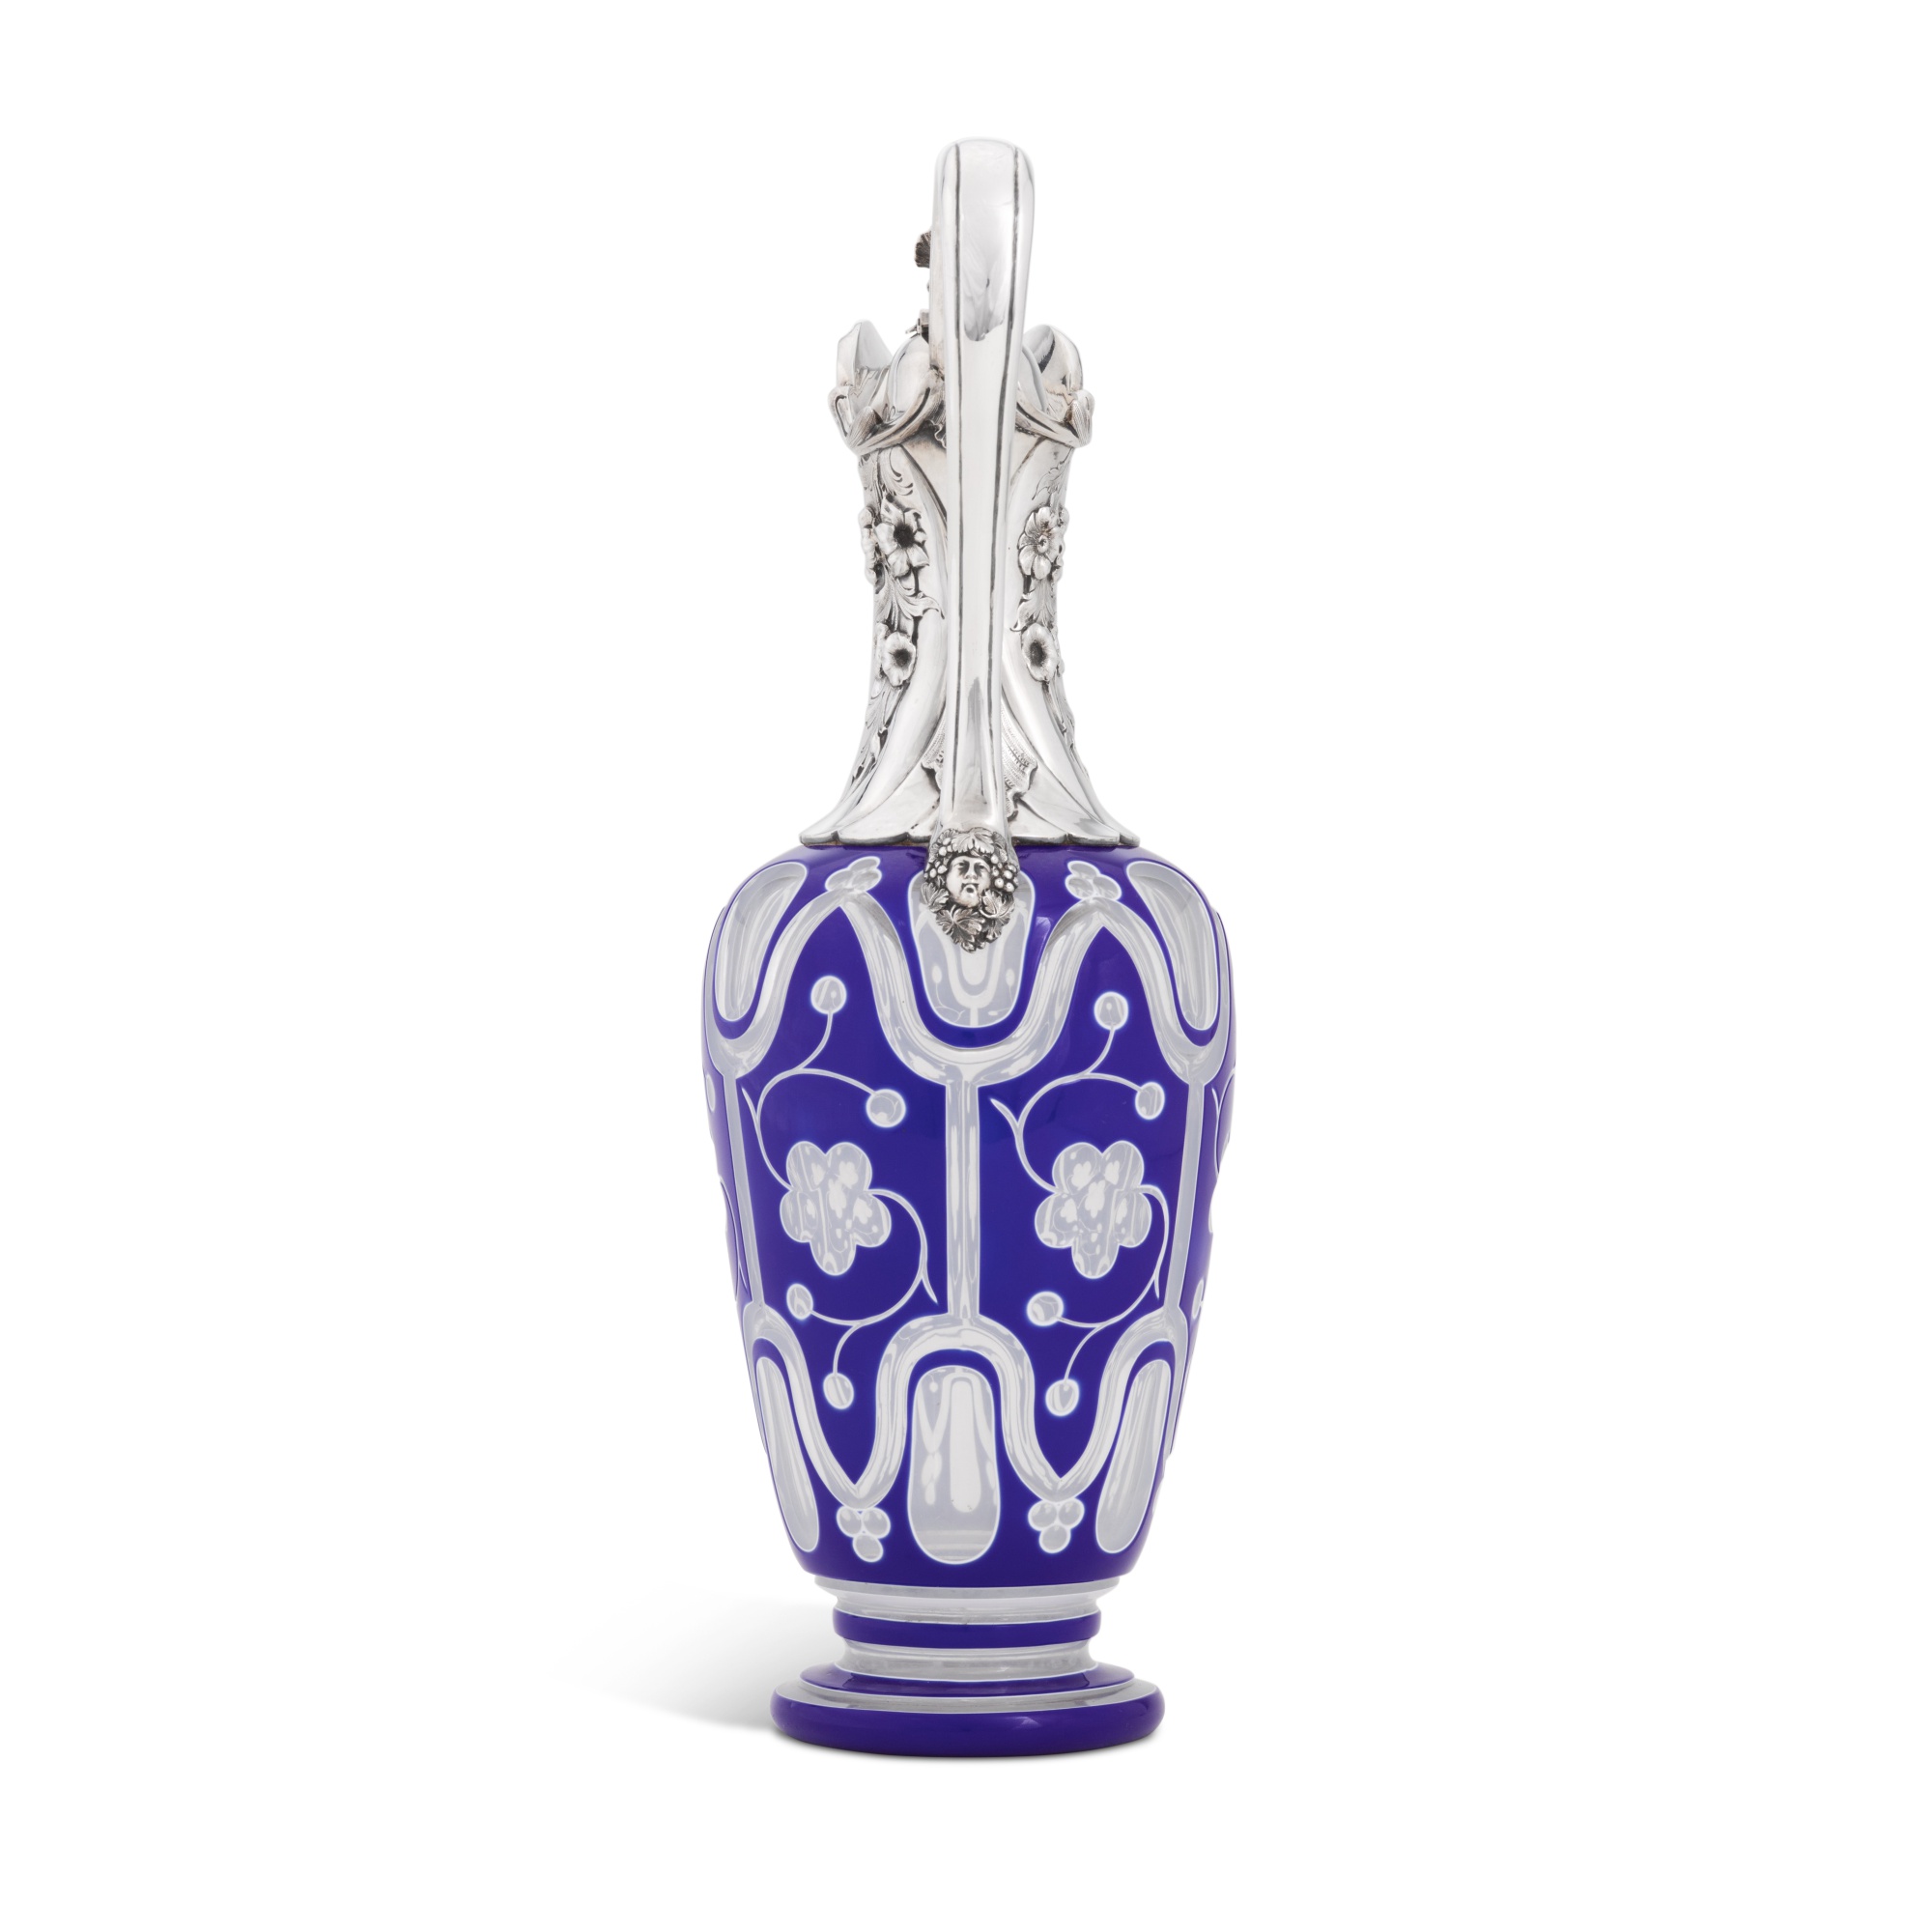 A Victorian silver-mounted glass claret jug, Charles Reily & George Storer, London, 1845 - Image 4 of 5